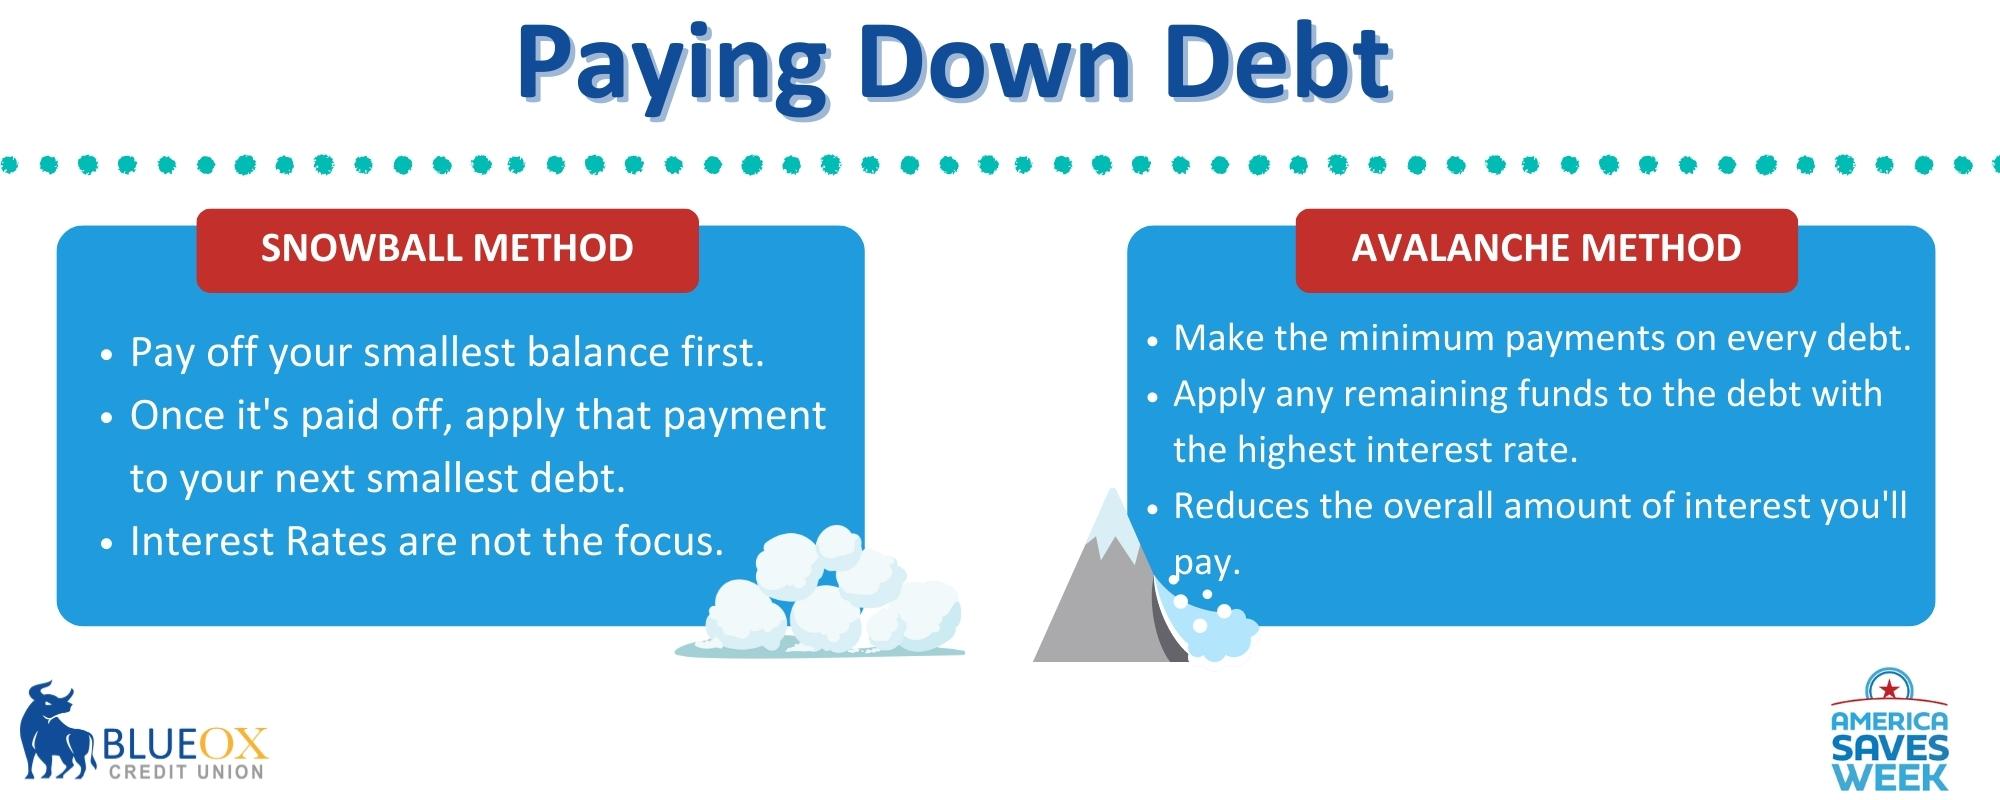 Paying Down Debt Image - BlueOx Credit Union